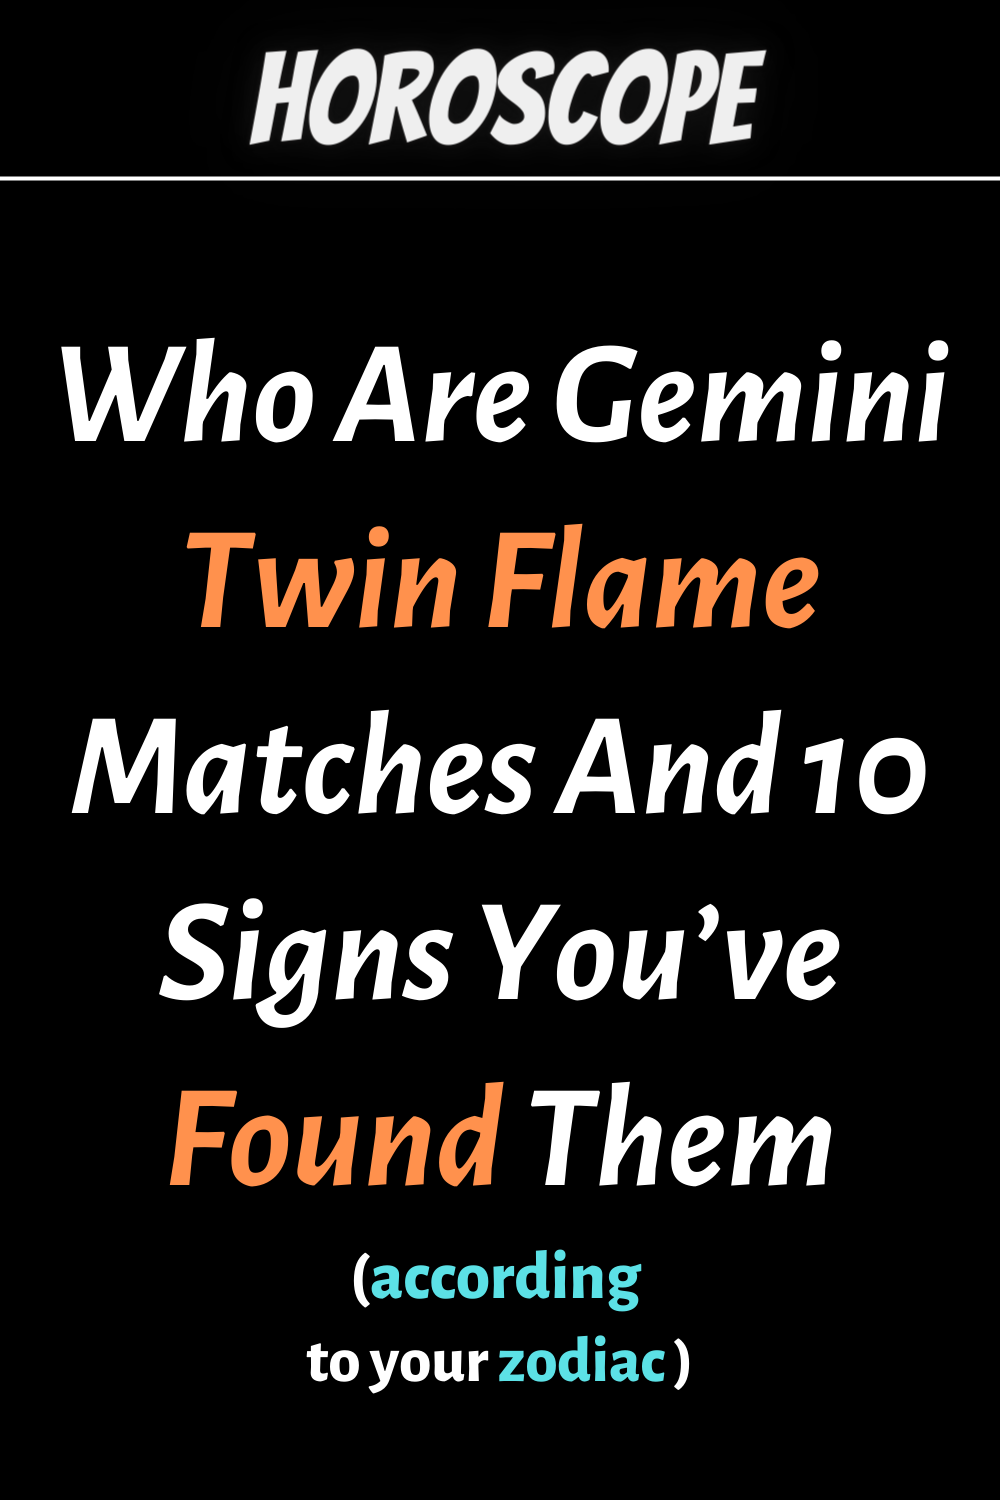 Who Are Gemini Twin Flame Matches And 10 Signs You’ve Found Them